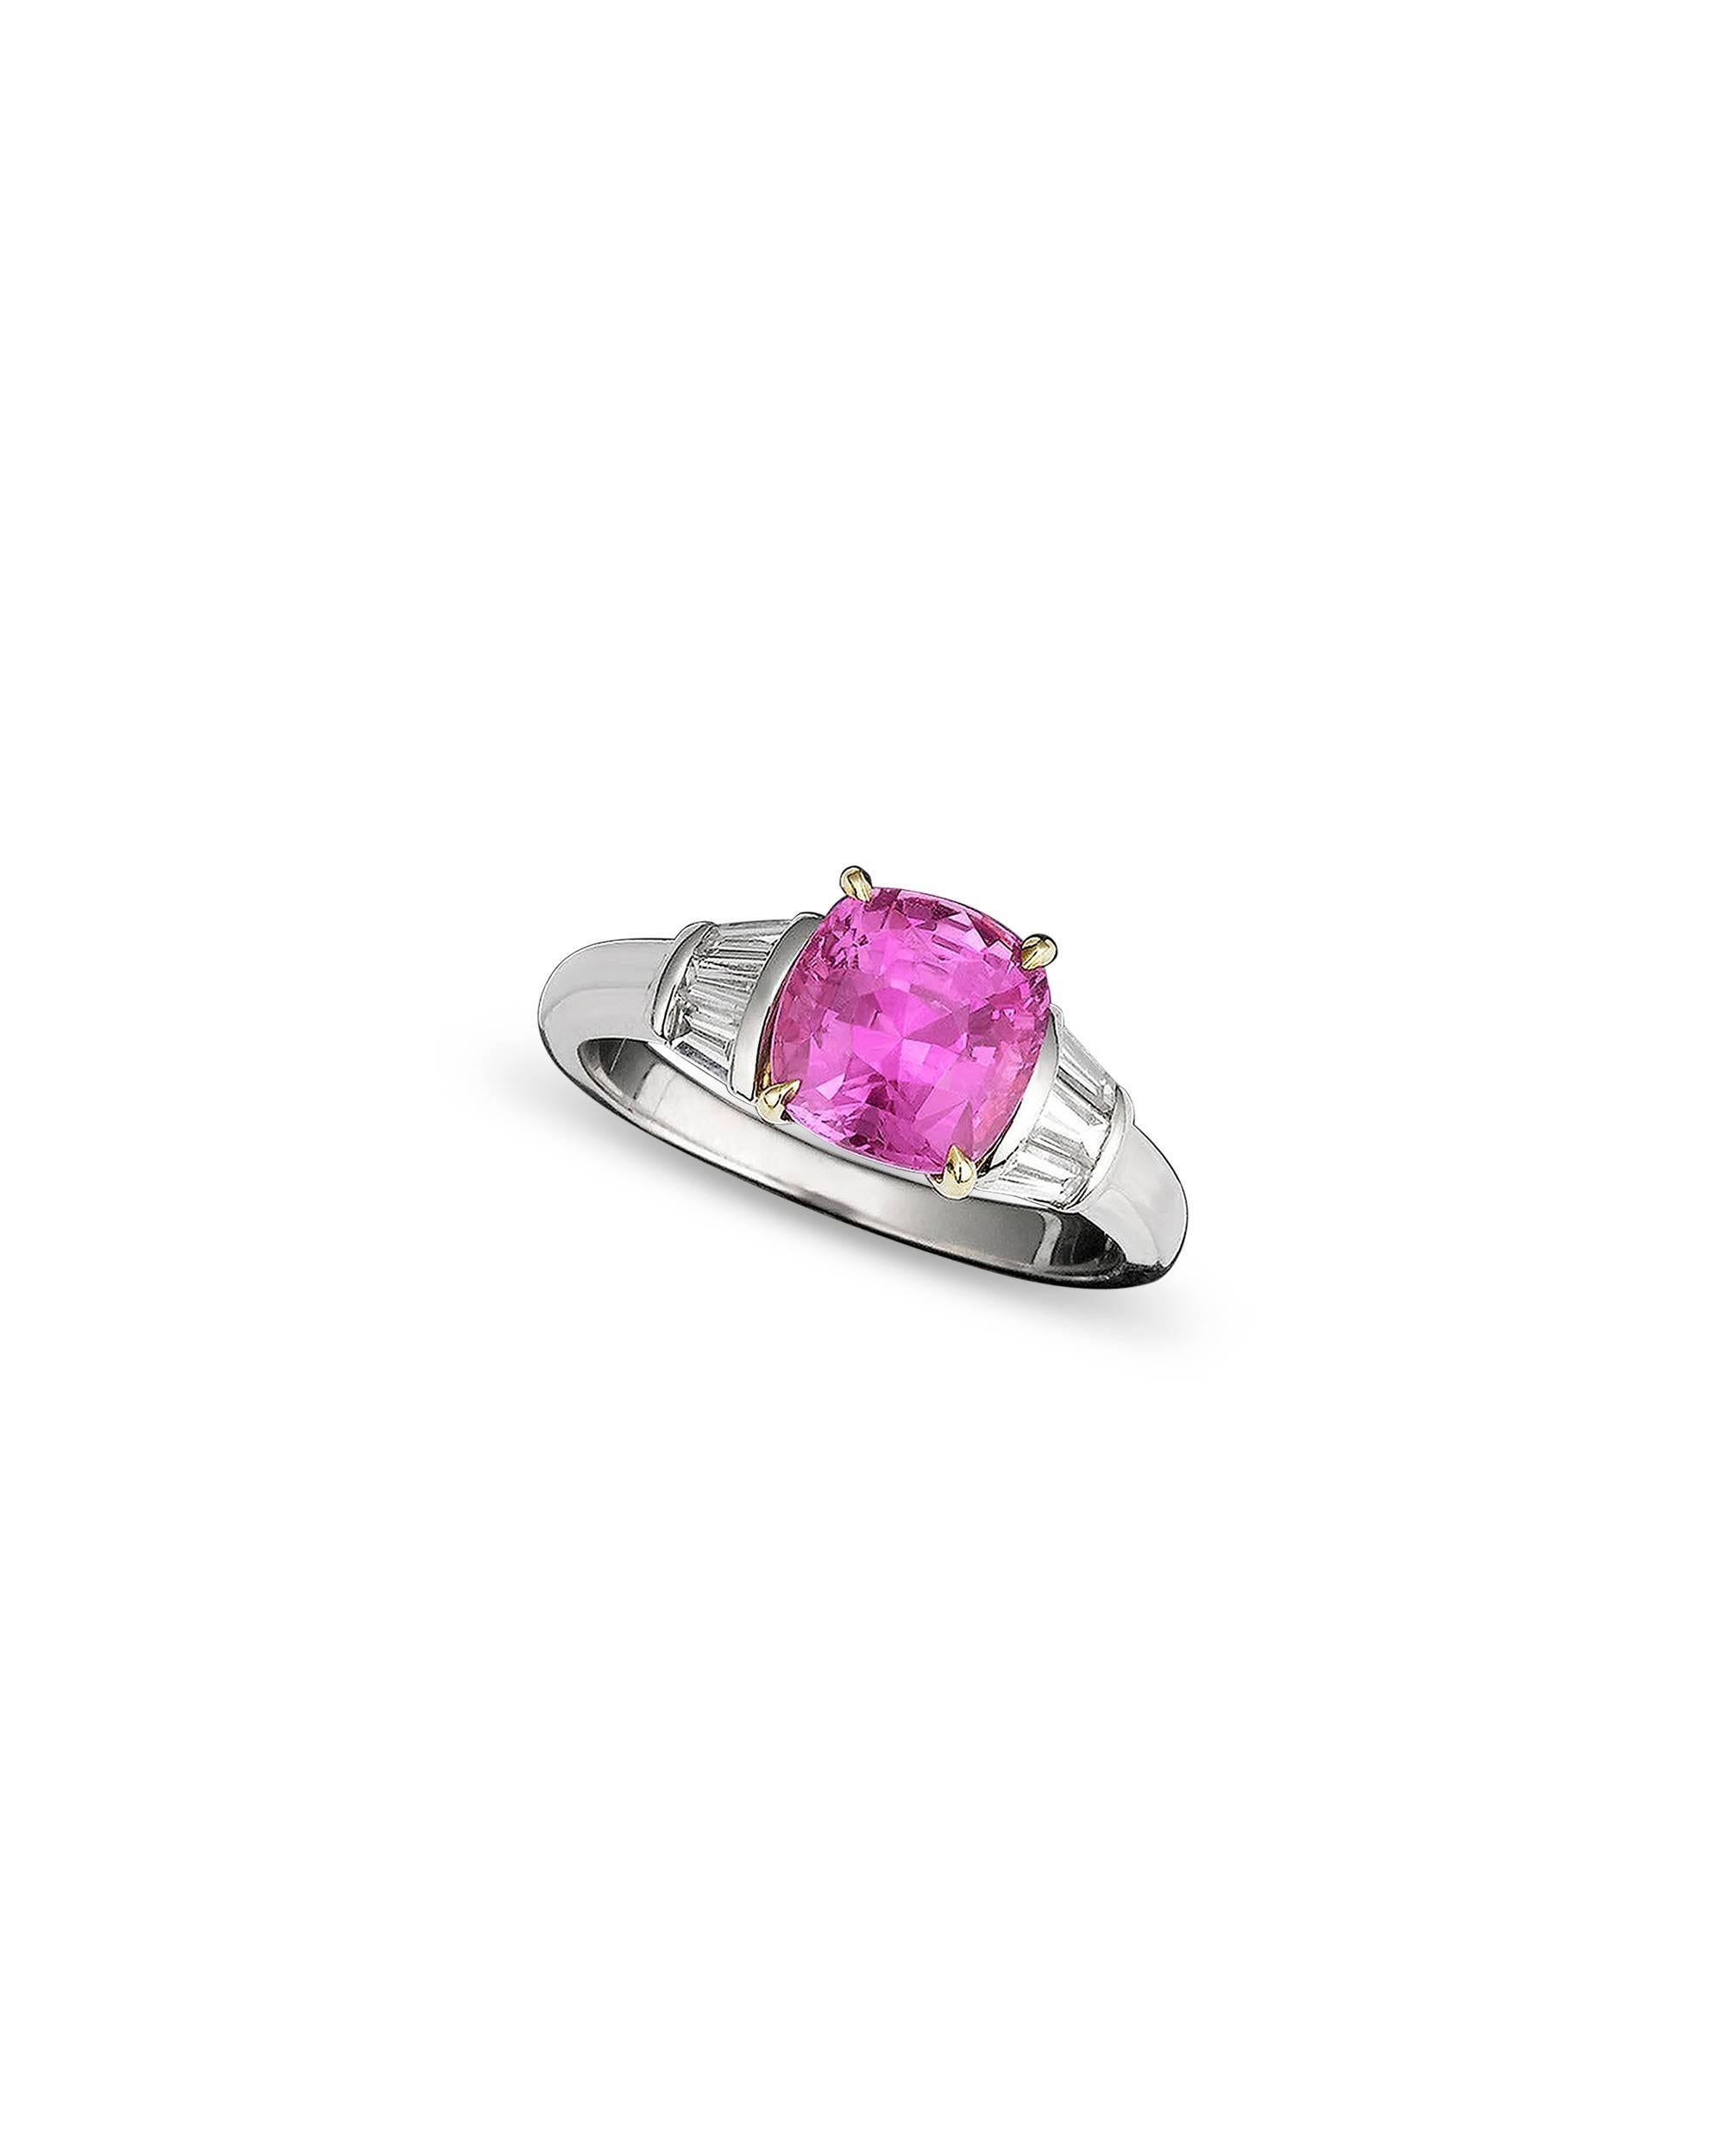 Exceptional color and transparency distinguish the incredibly rare pink sapphire in this enchanting ring. Certified by the American Gem Trade Association (AGTA) as being completely natural with no heat treatment, this 2.79-carat jewel is flanked by